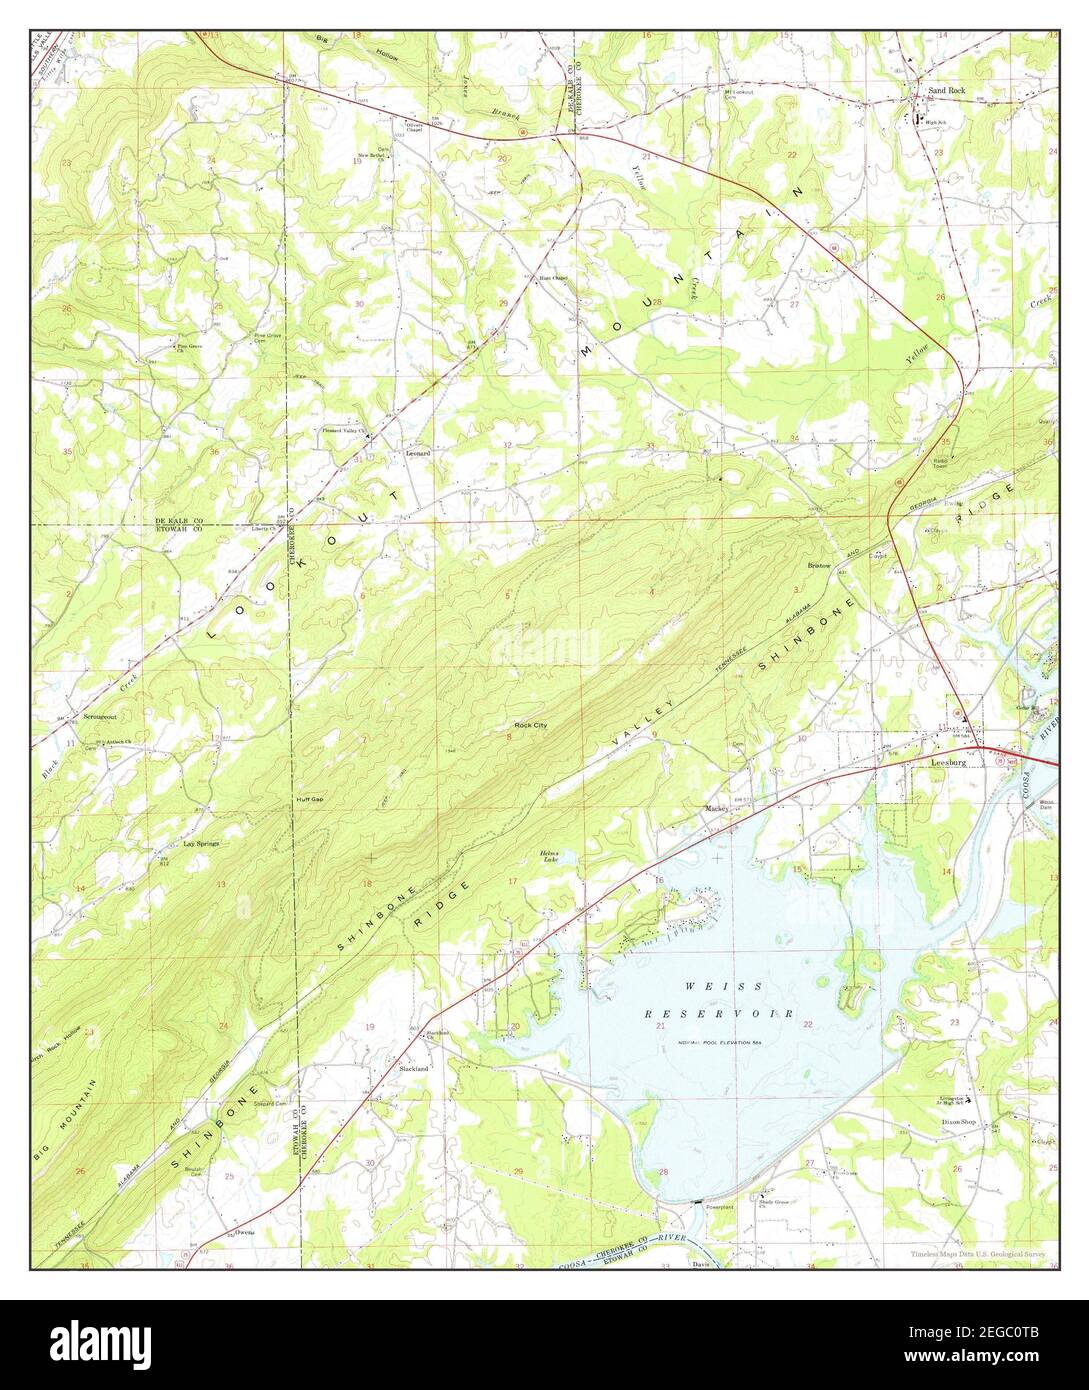 Leesburg, Alabama, map 1967, 1:24000, United States of America by Timeless Maps, data U.S. Geological Survey Stock Photo